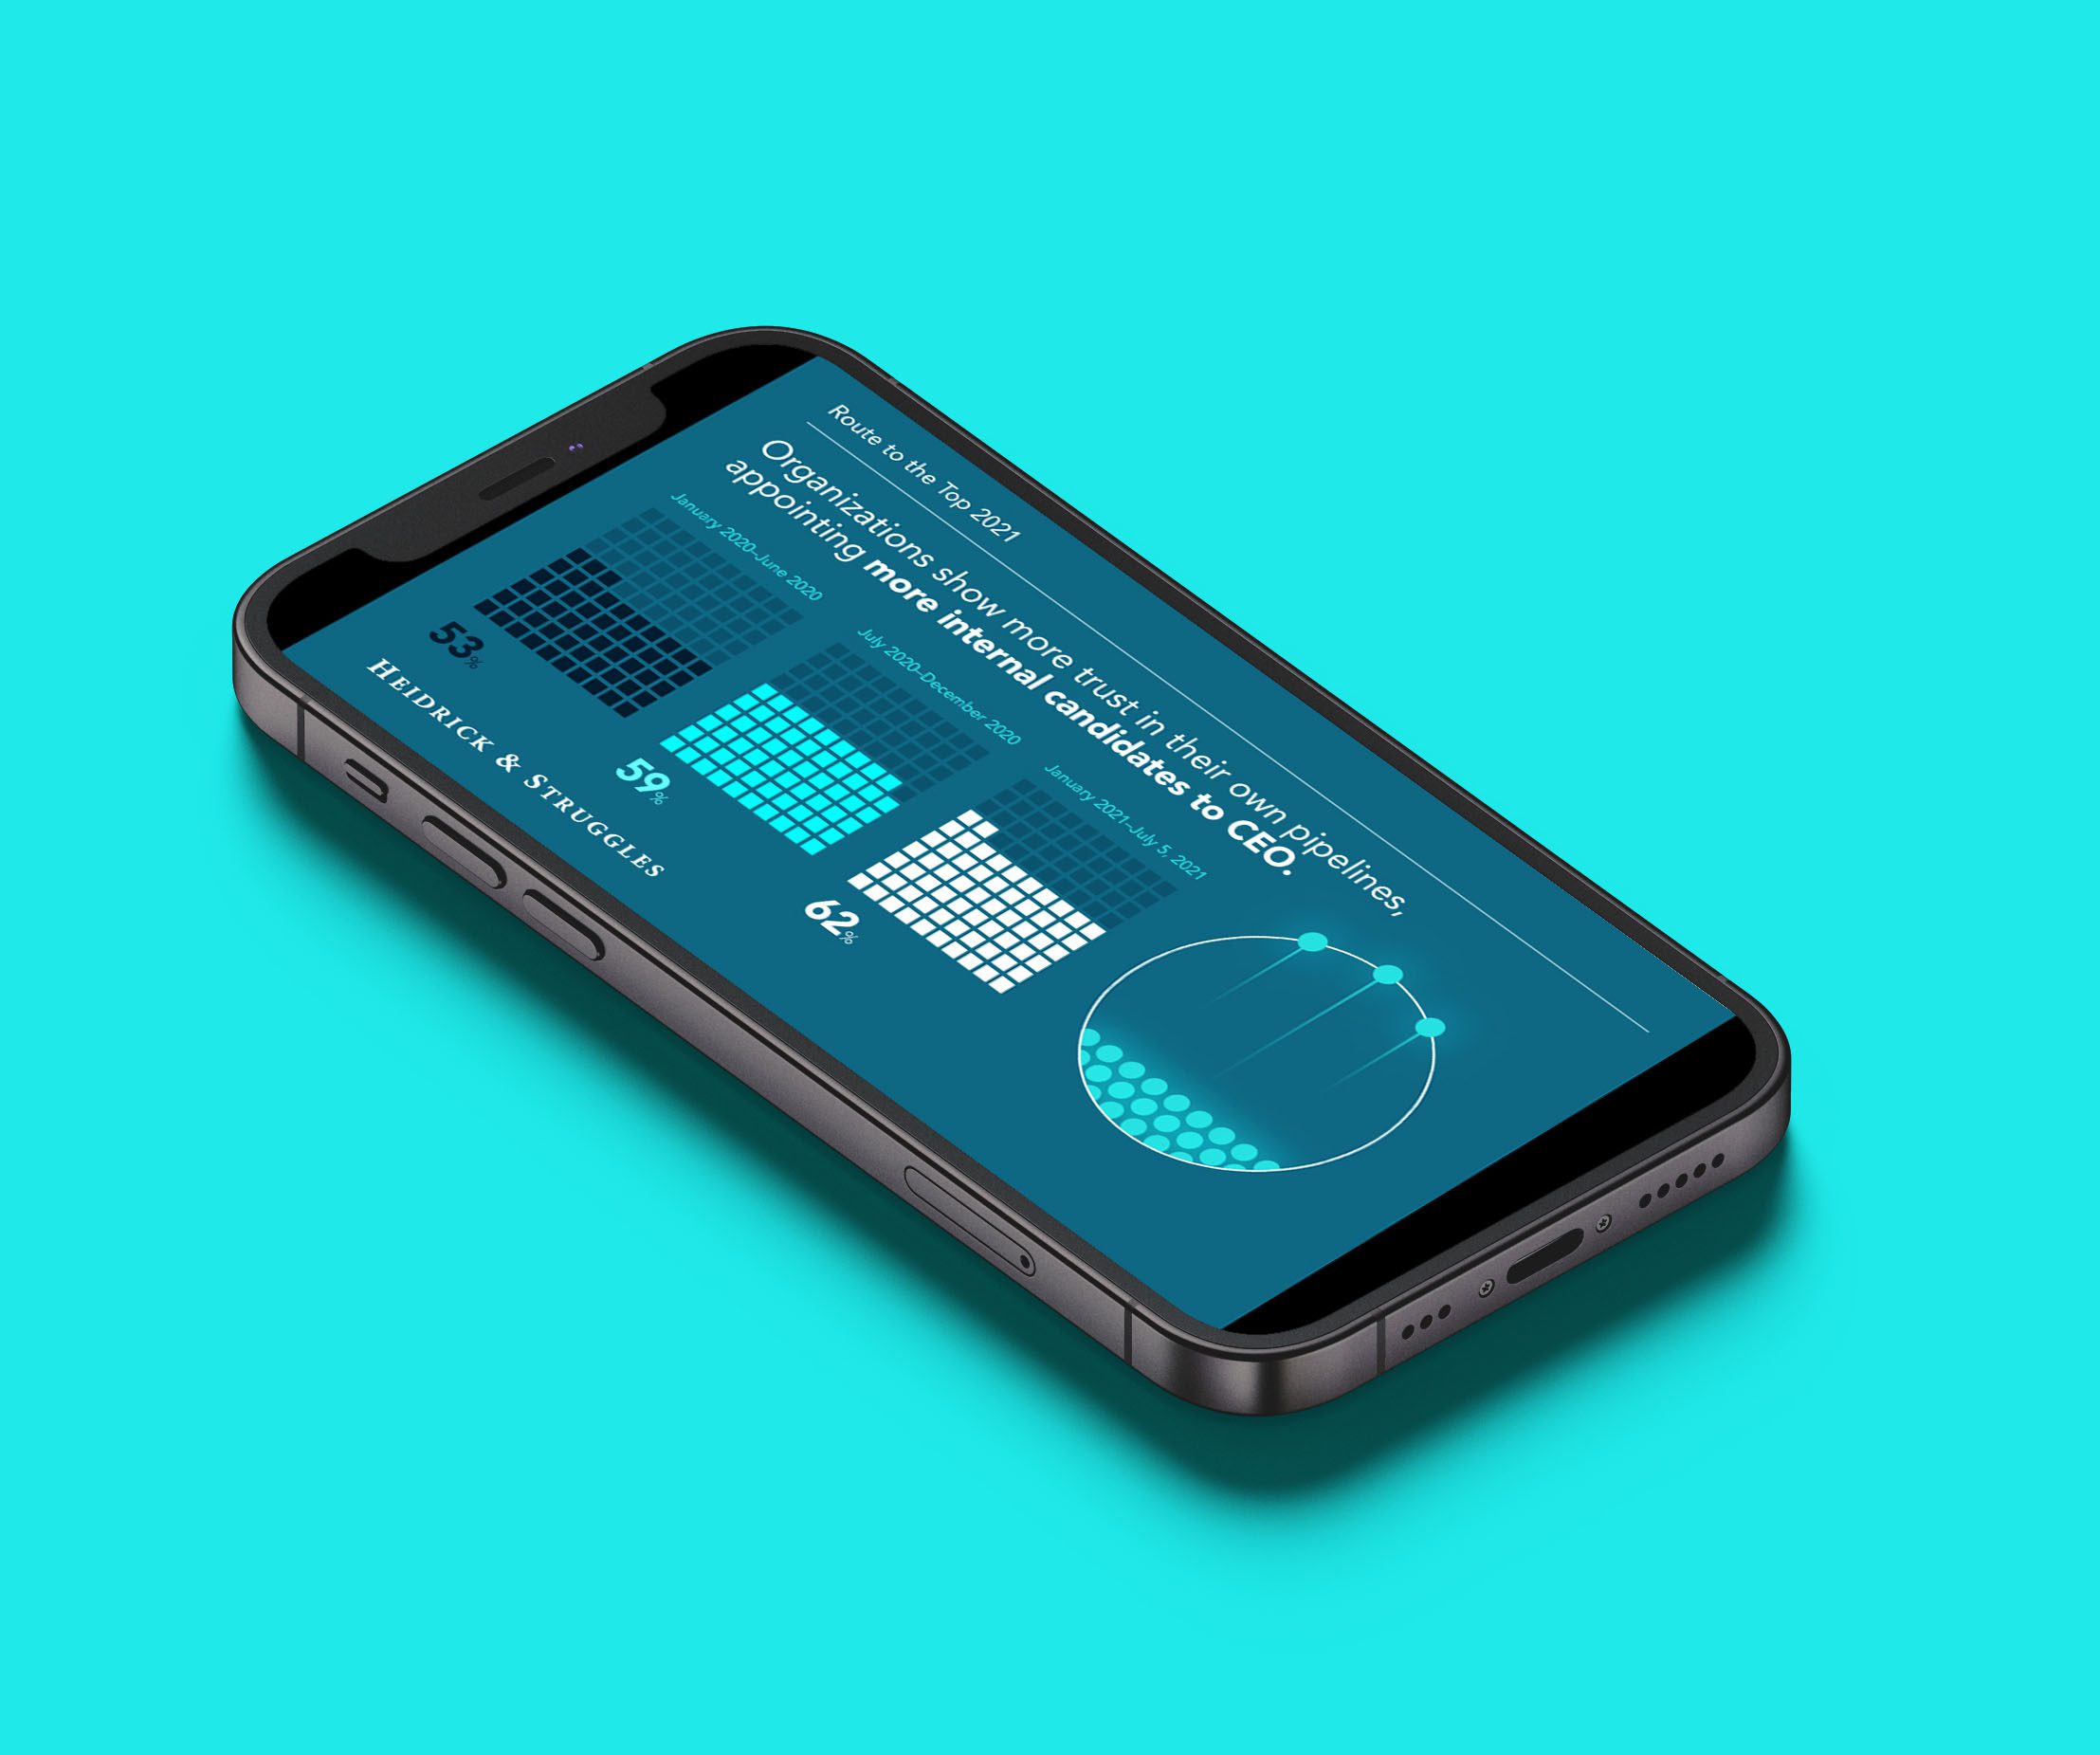 A social media mock up design shown in a phone against a teal background